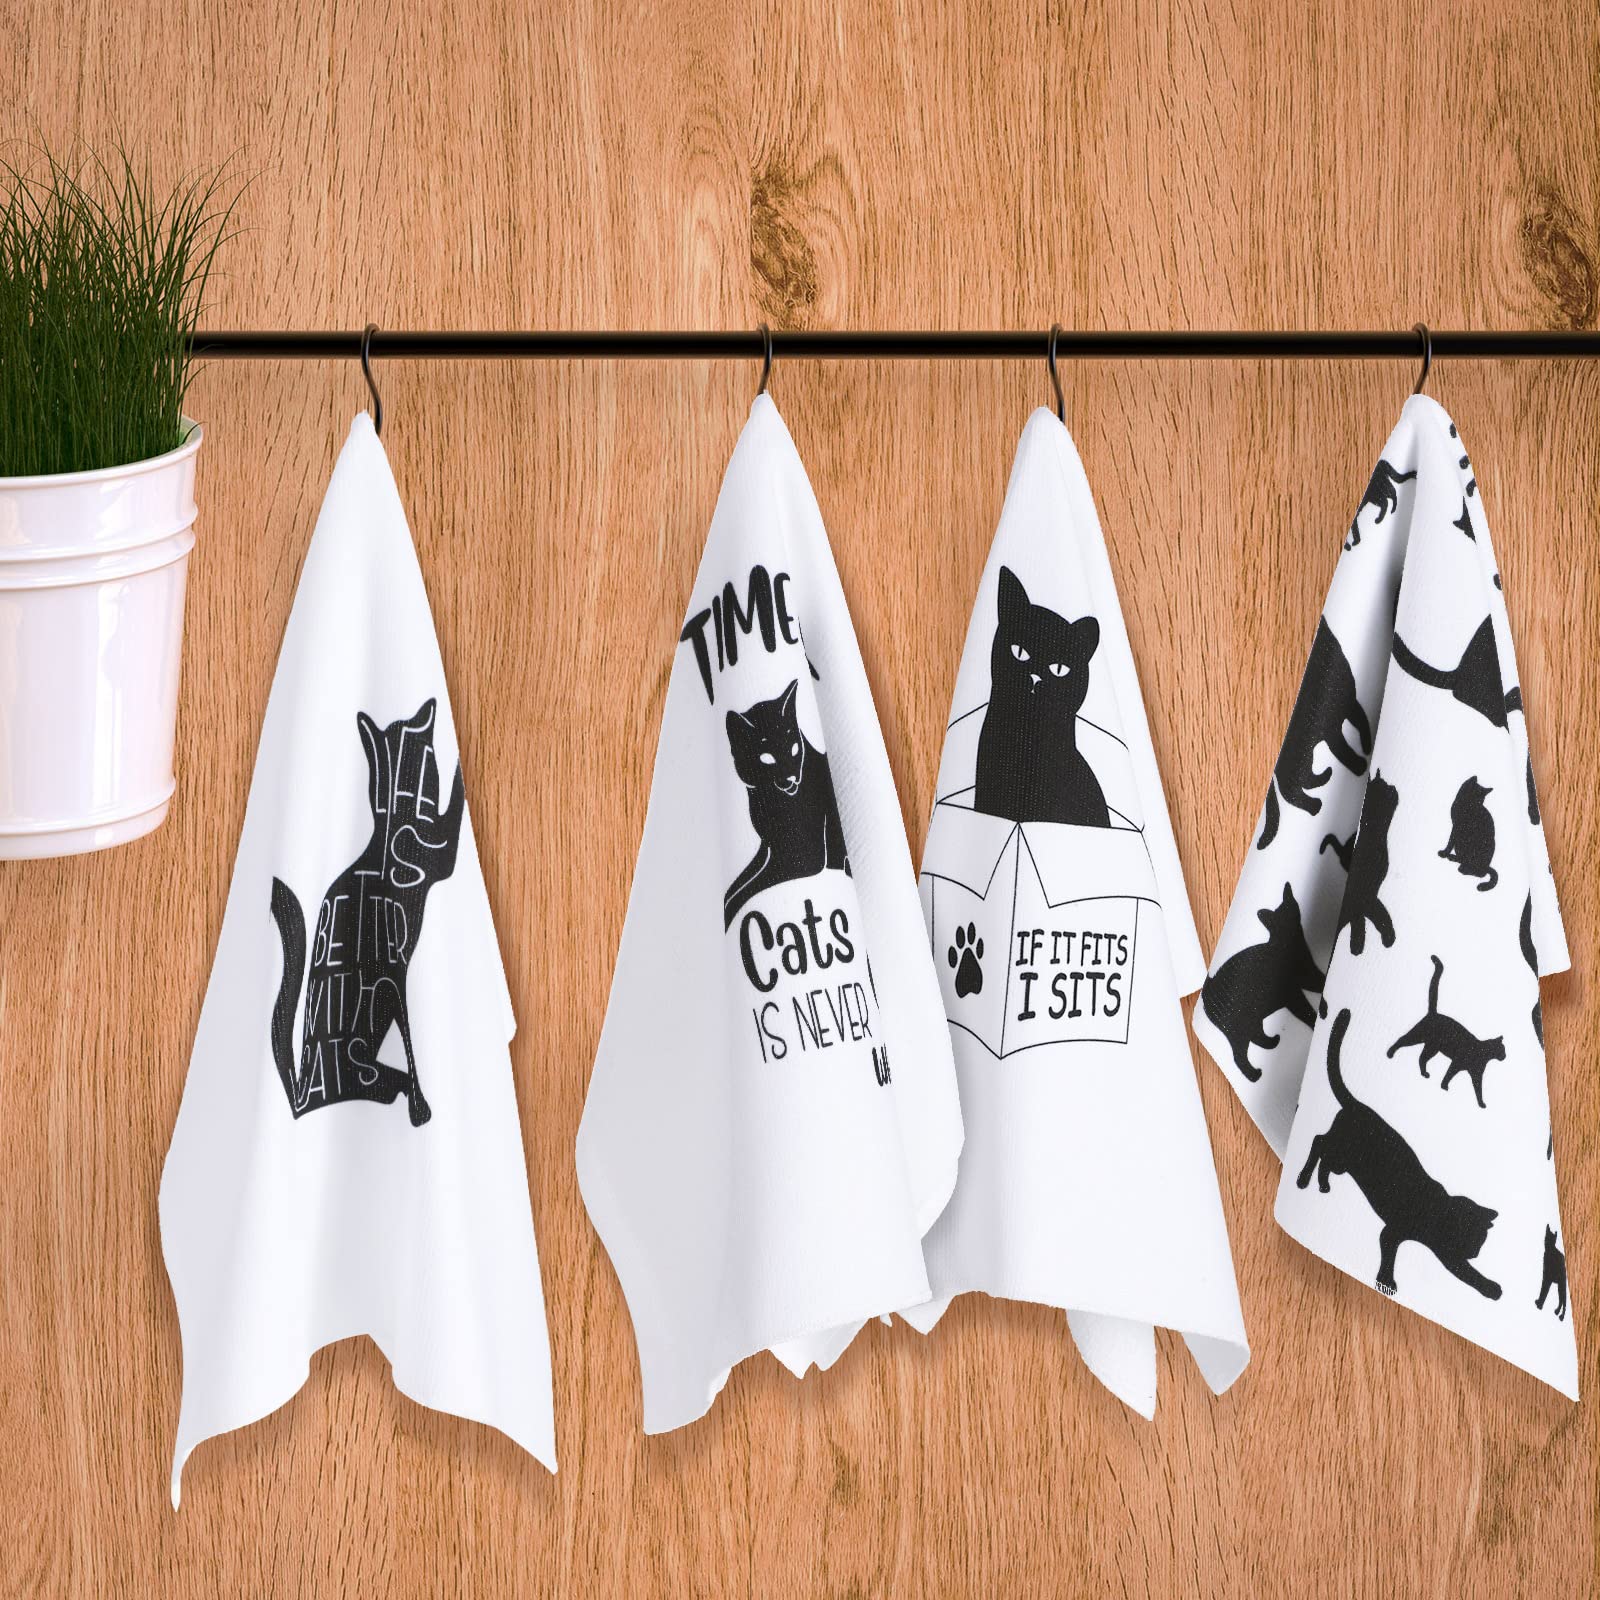 Vesici 4 Pieces Funny Cat Kitchen Towels Cute Cat Theme Dish Towels Set Absorbent Kitchen Tea Towels Farmhouse Decorative Hand Towels for Housewarming, Birthday, Christmas Towels, Pet Lover Fun Gift